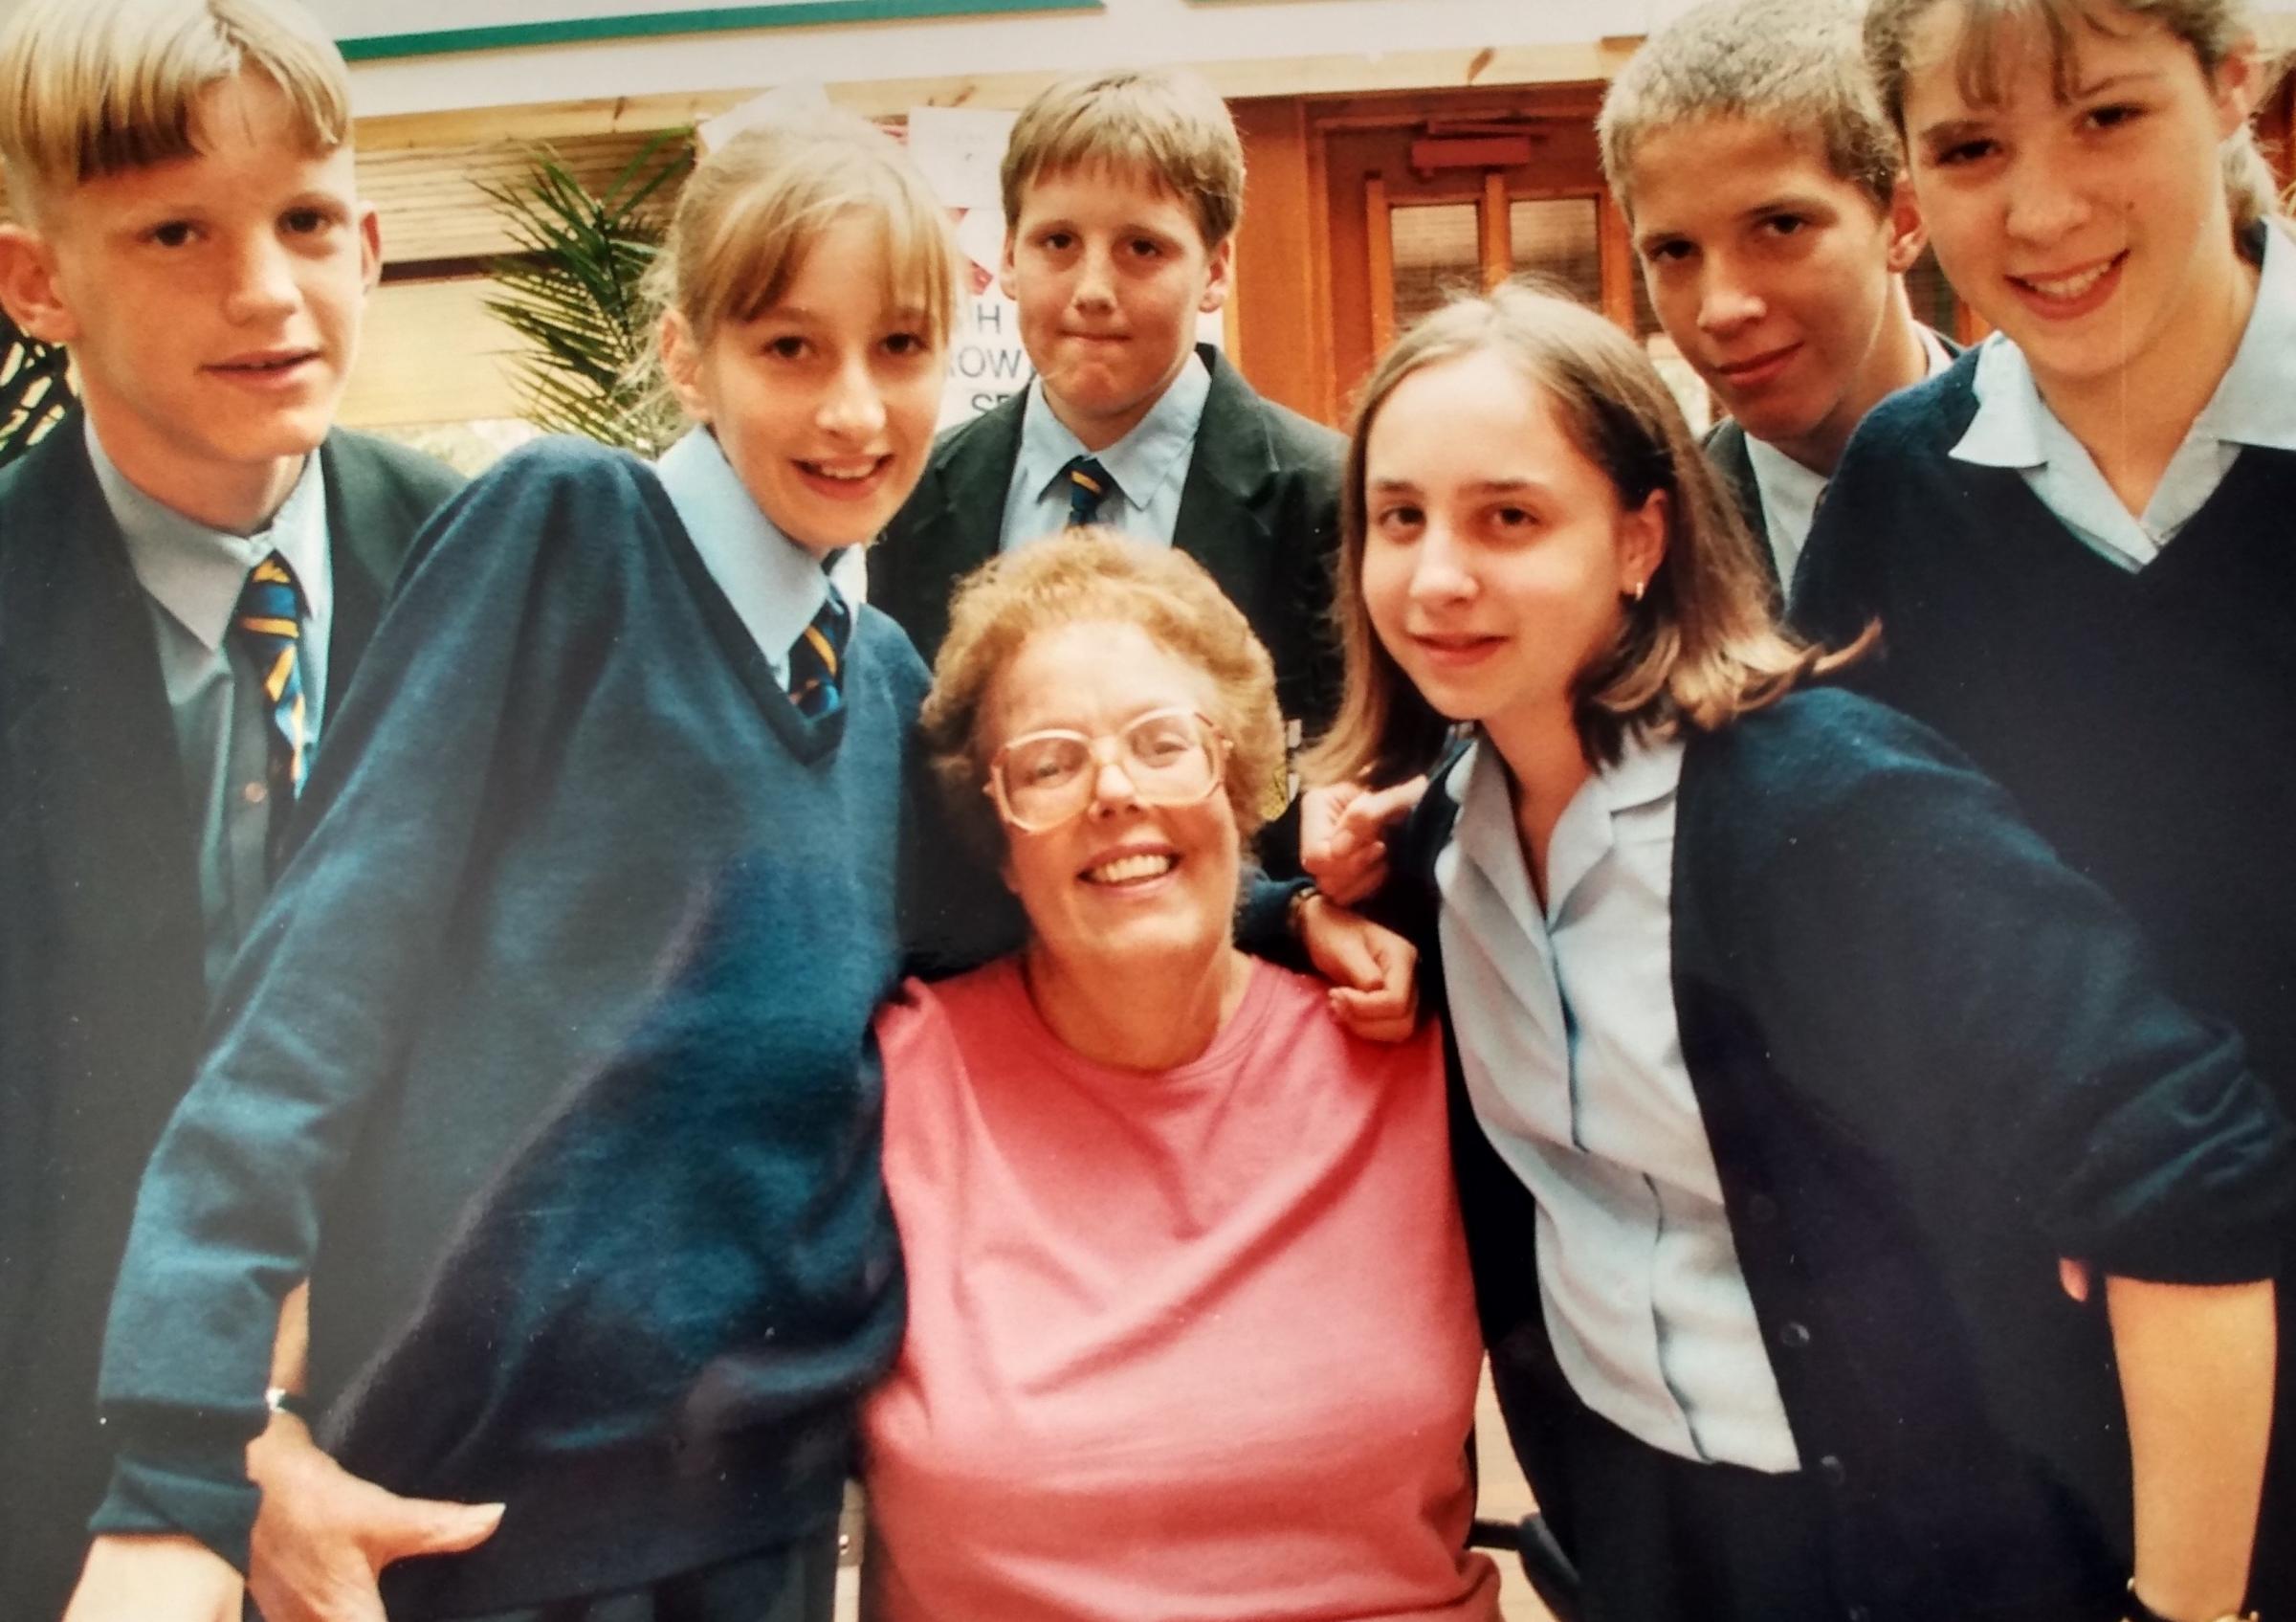 July 1997 and it was time for school secretary Annie Andrews to retire after spending 23 years at the school